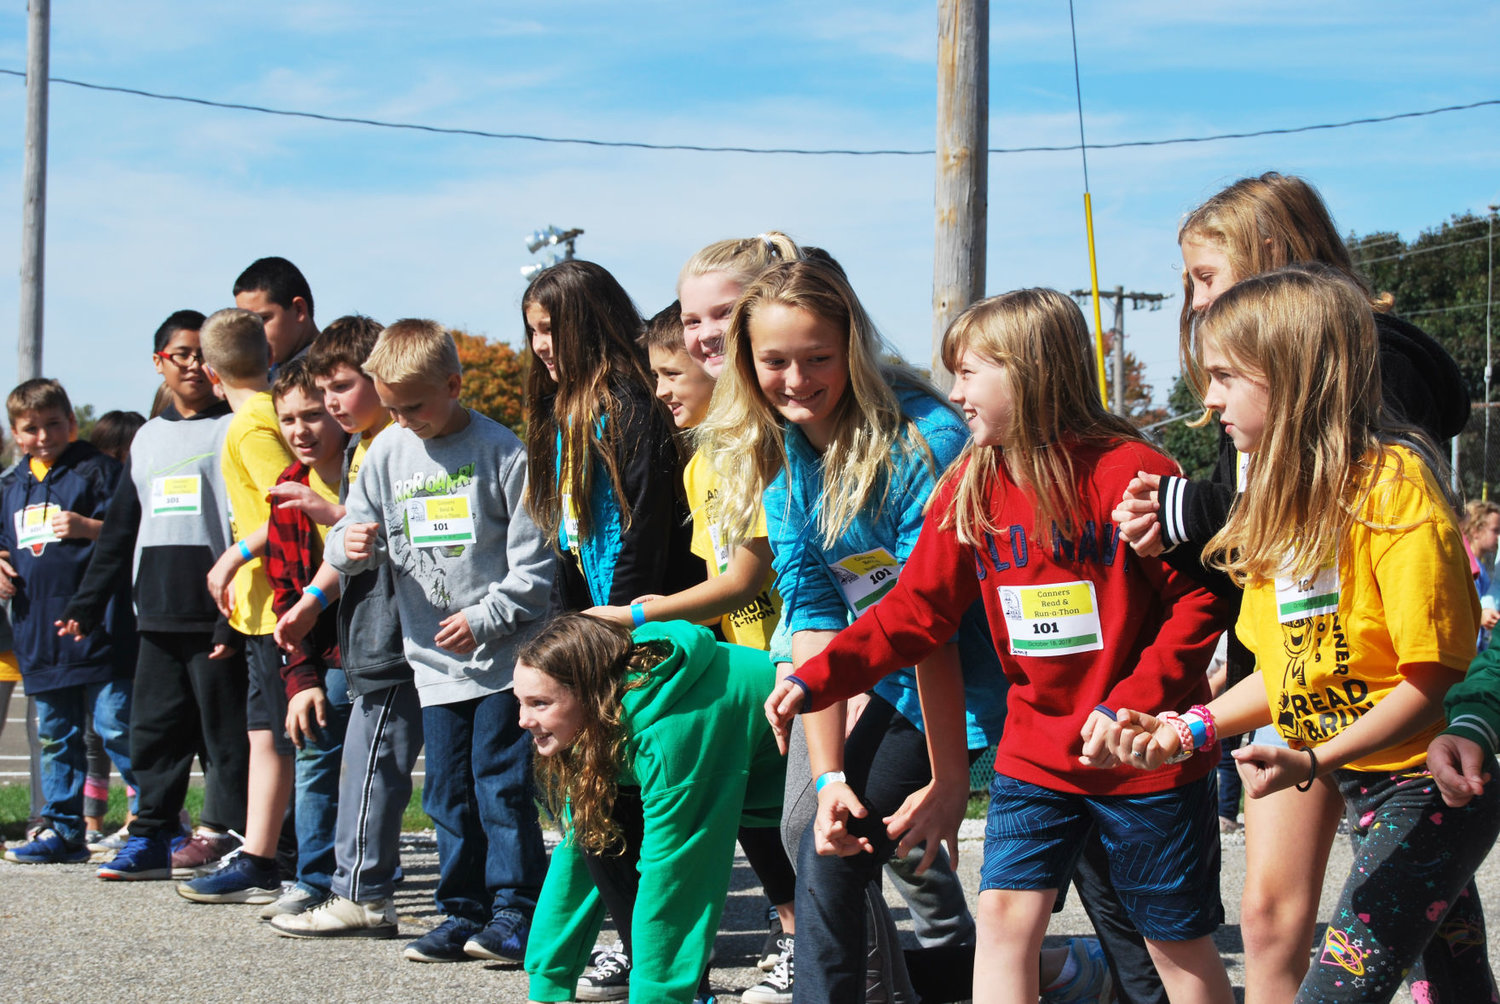 Students at Ladoga Elementary line up to begin their run